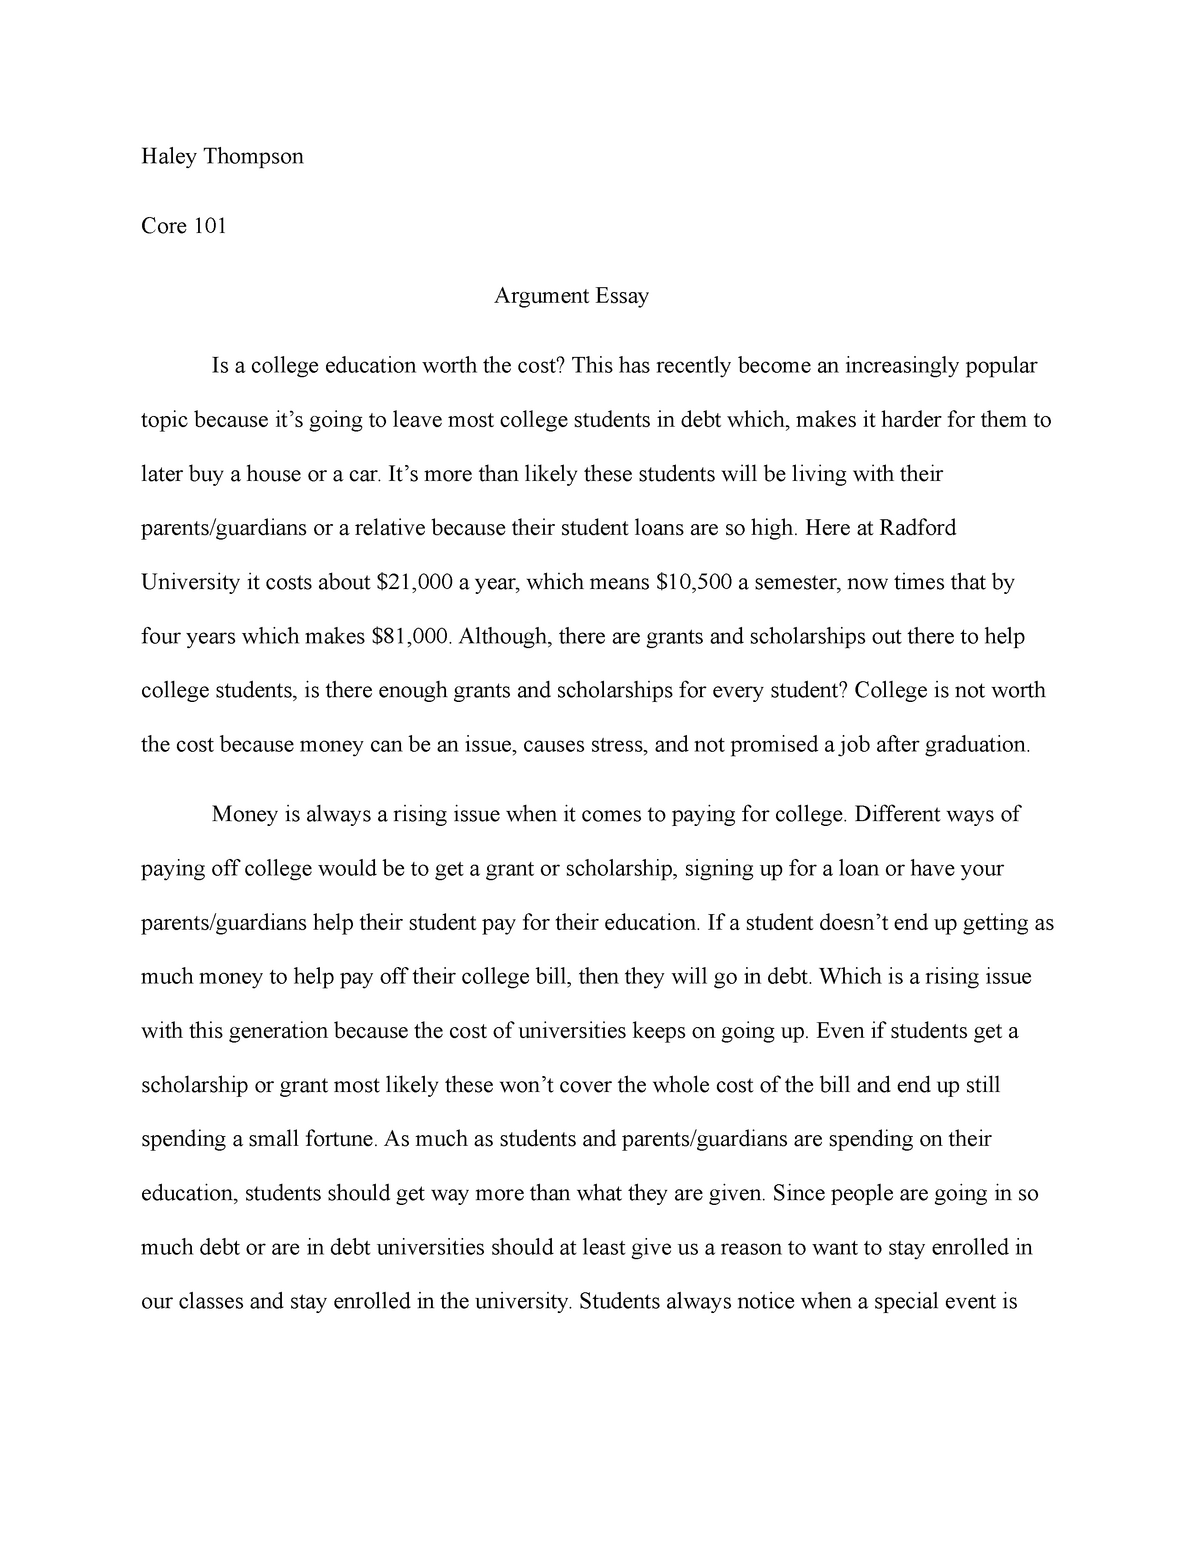 essay about the cost of college